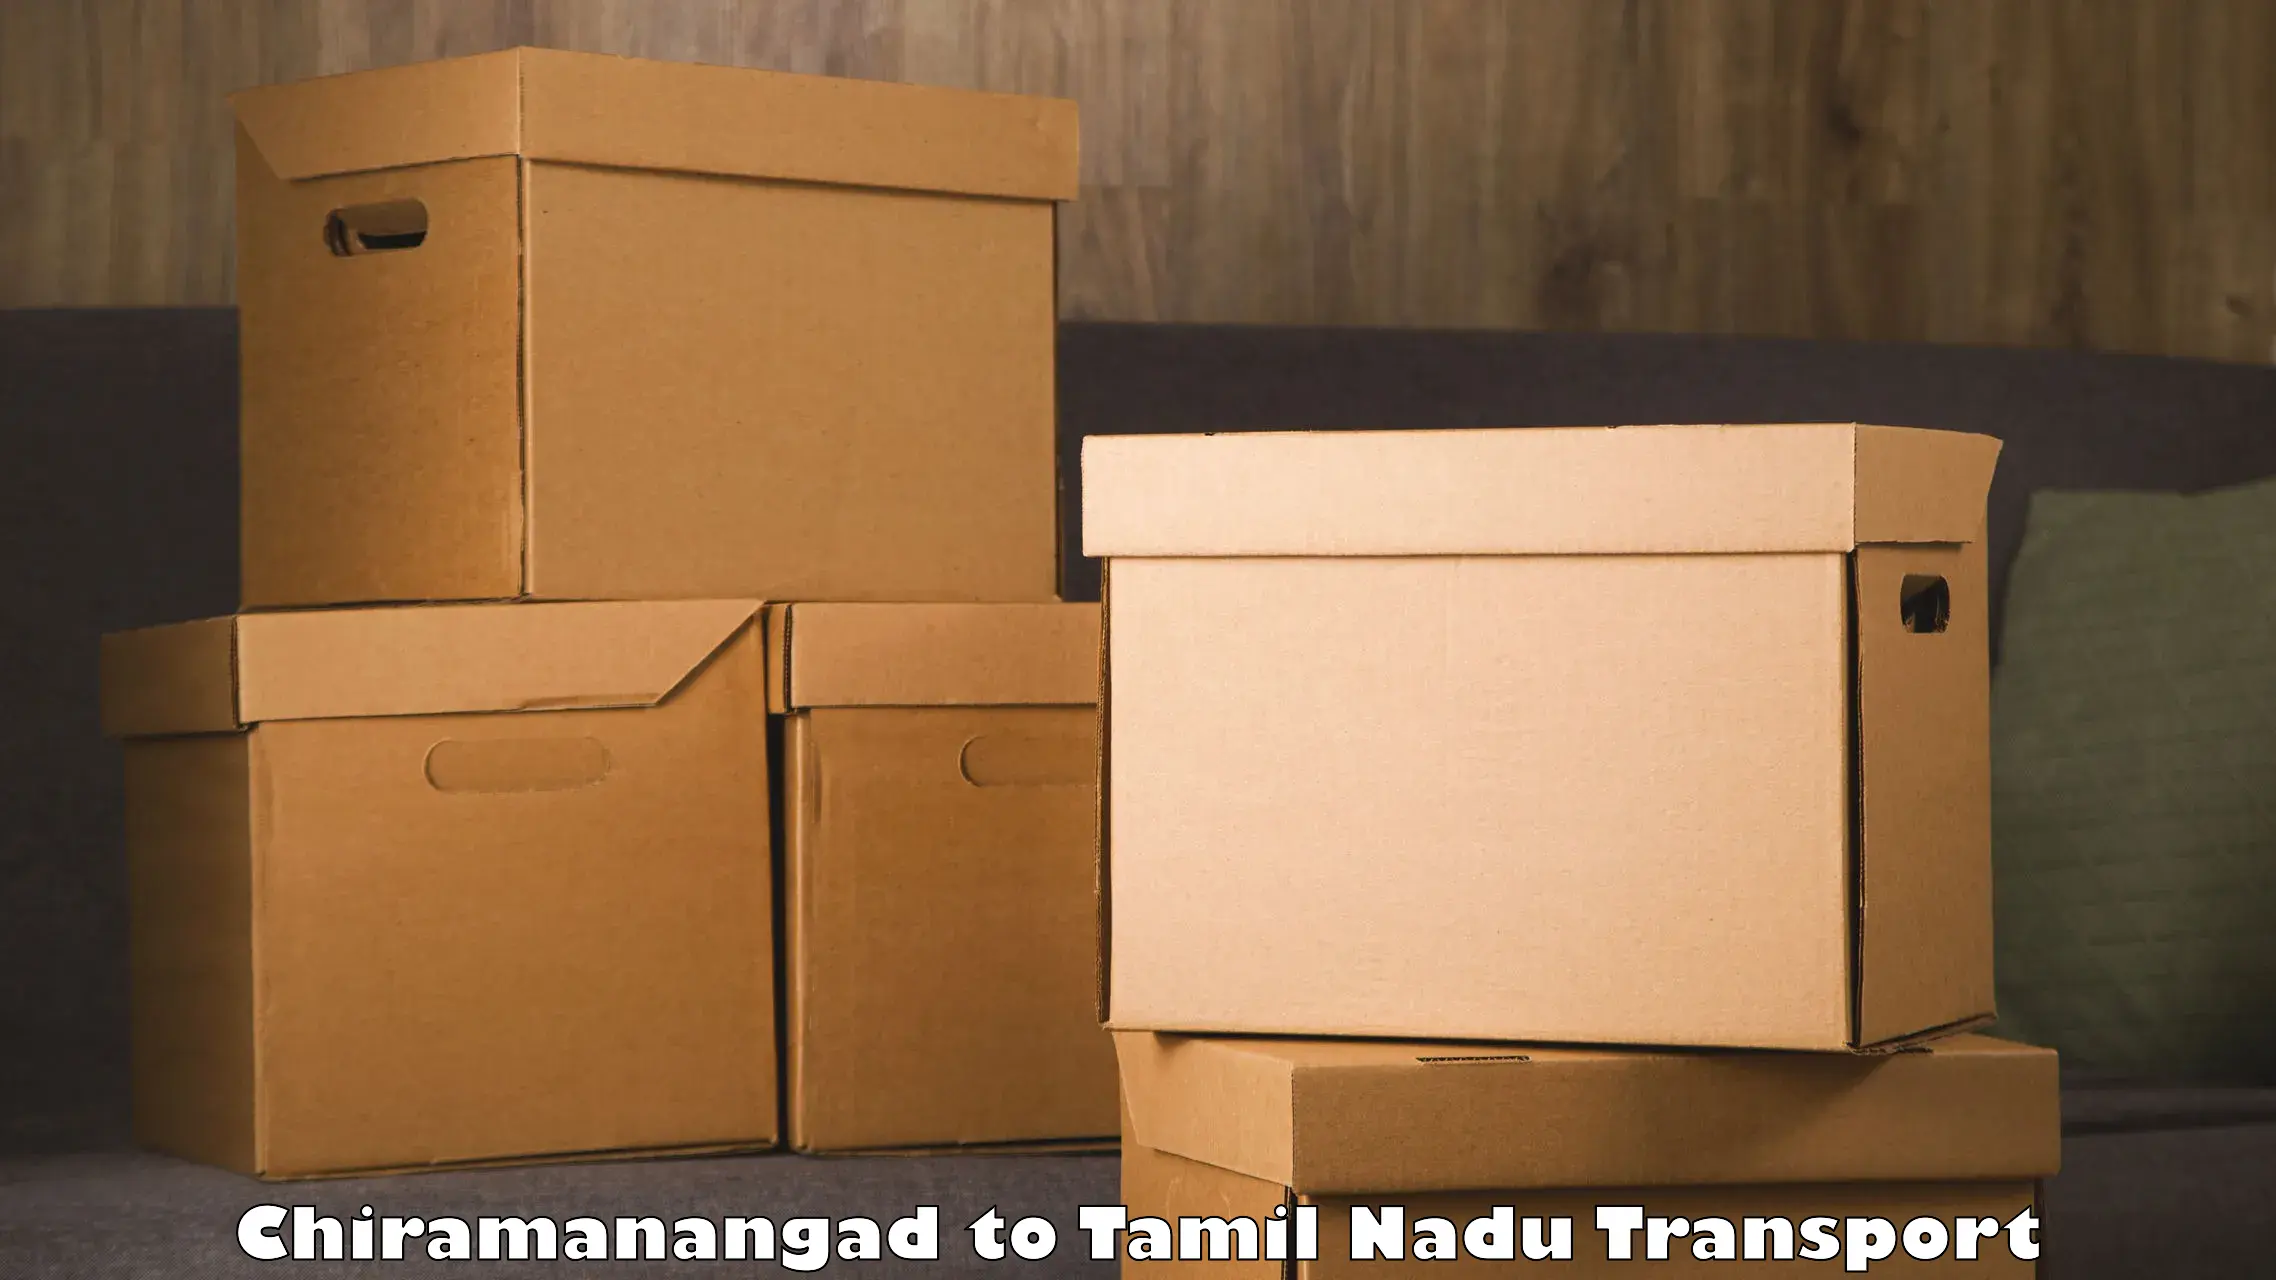 Daily parcel service transport Chiramanangad to Ennore Port Chennai